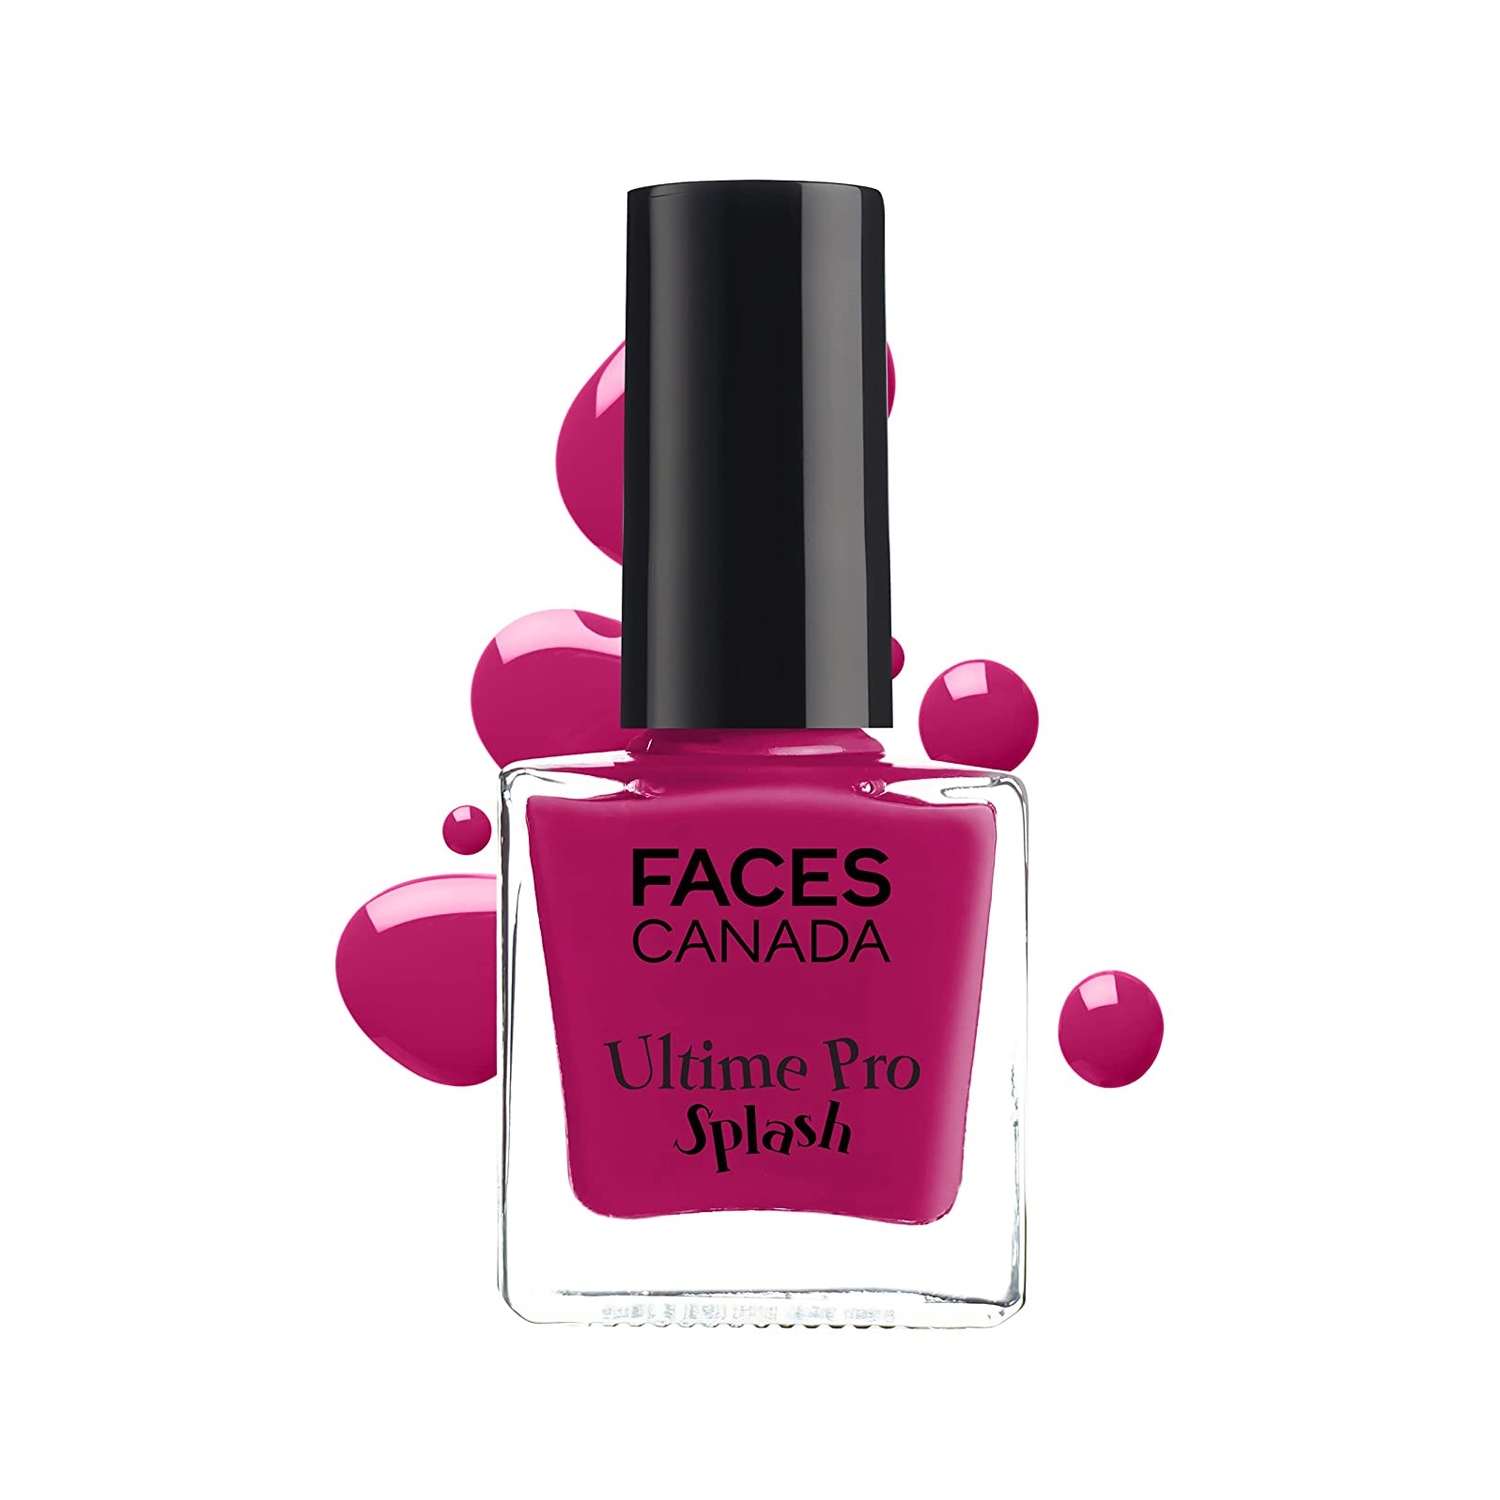 Buy Faces Glossy Splash Nail Enamel, Maroon 401, 8 ml and Faces Canada  Glossy Splash Nail Enamel, Royal Ruby 24, 8 ml Online at Low Prices in  India - Amazon.in